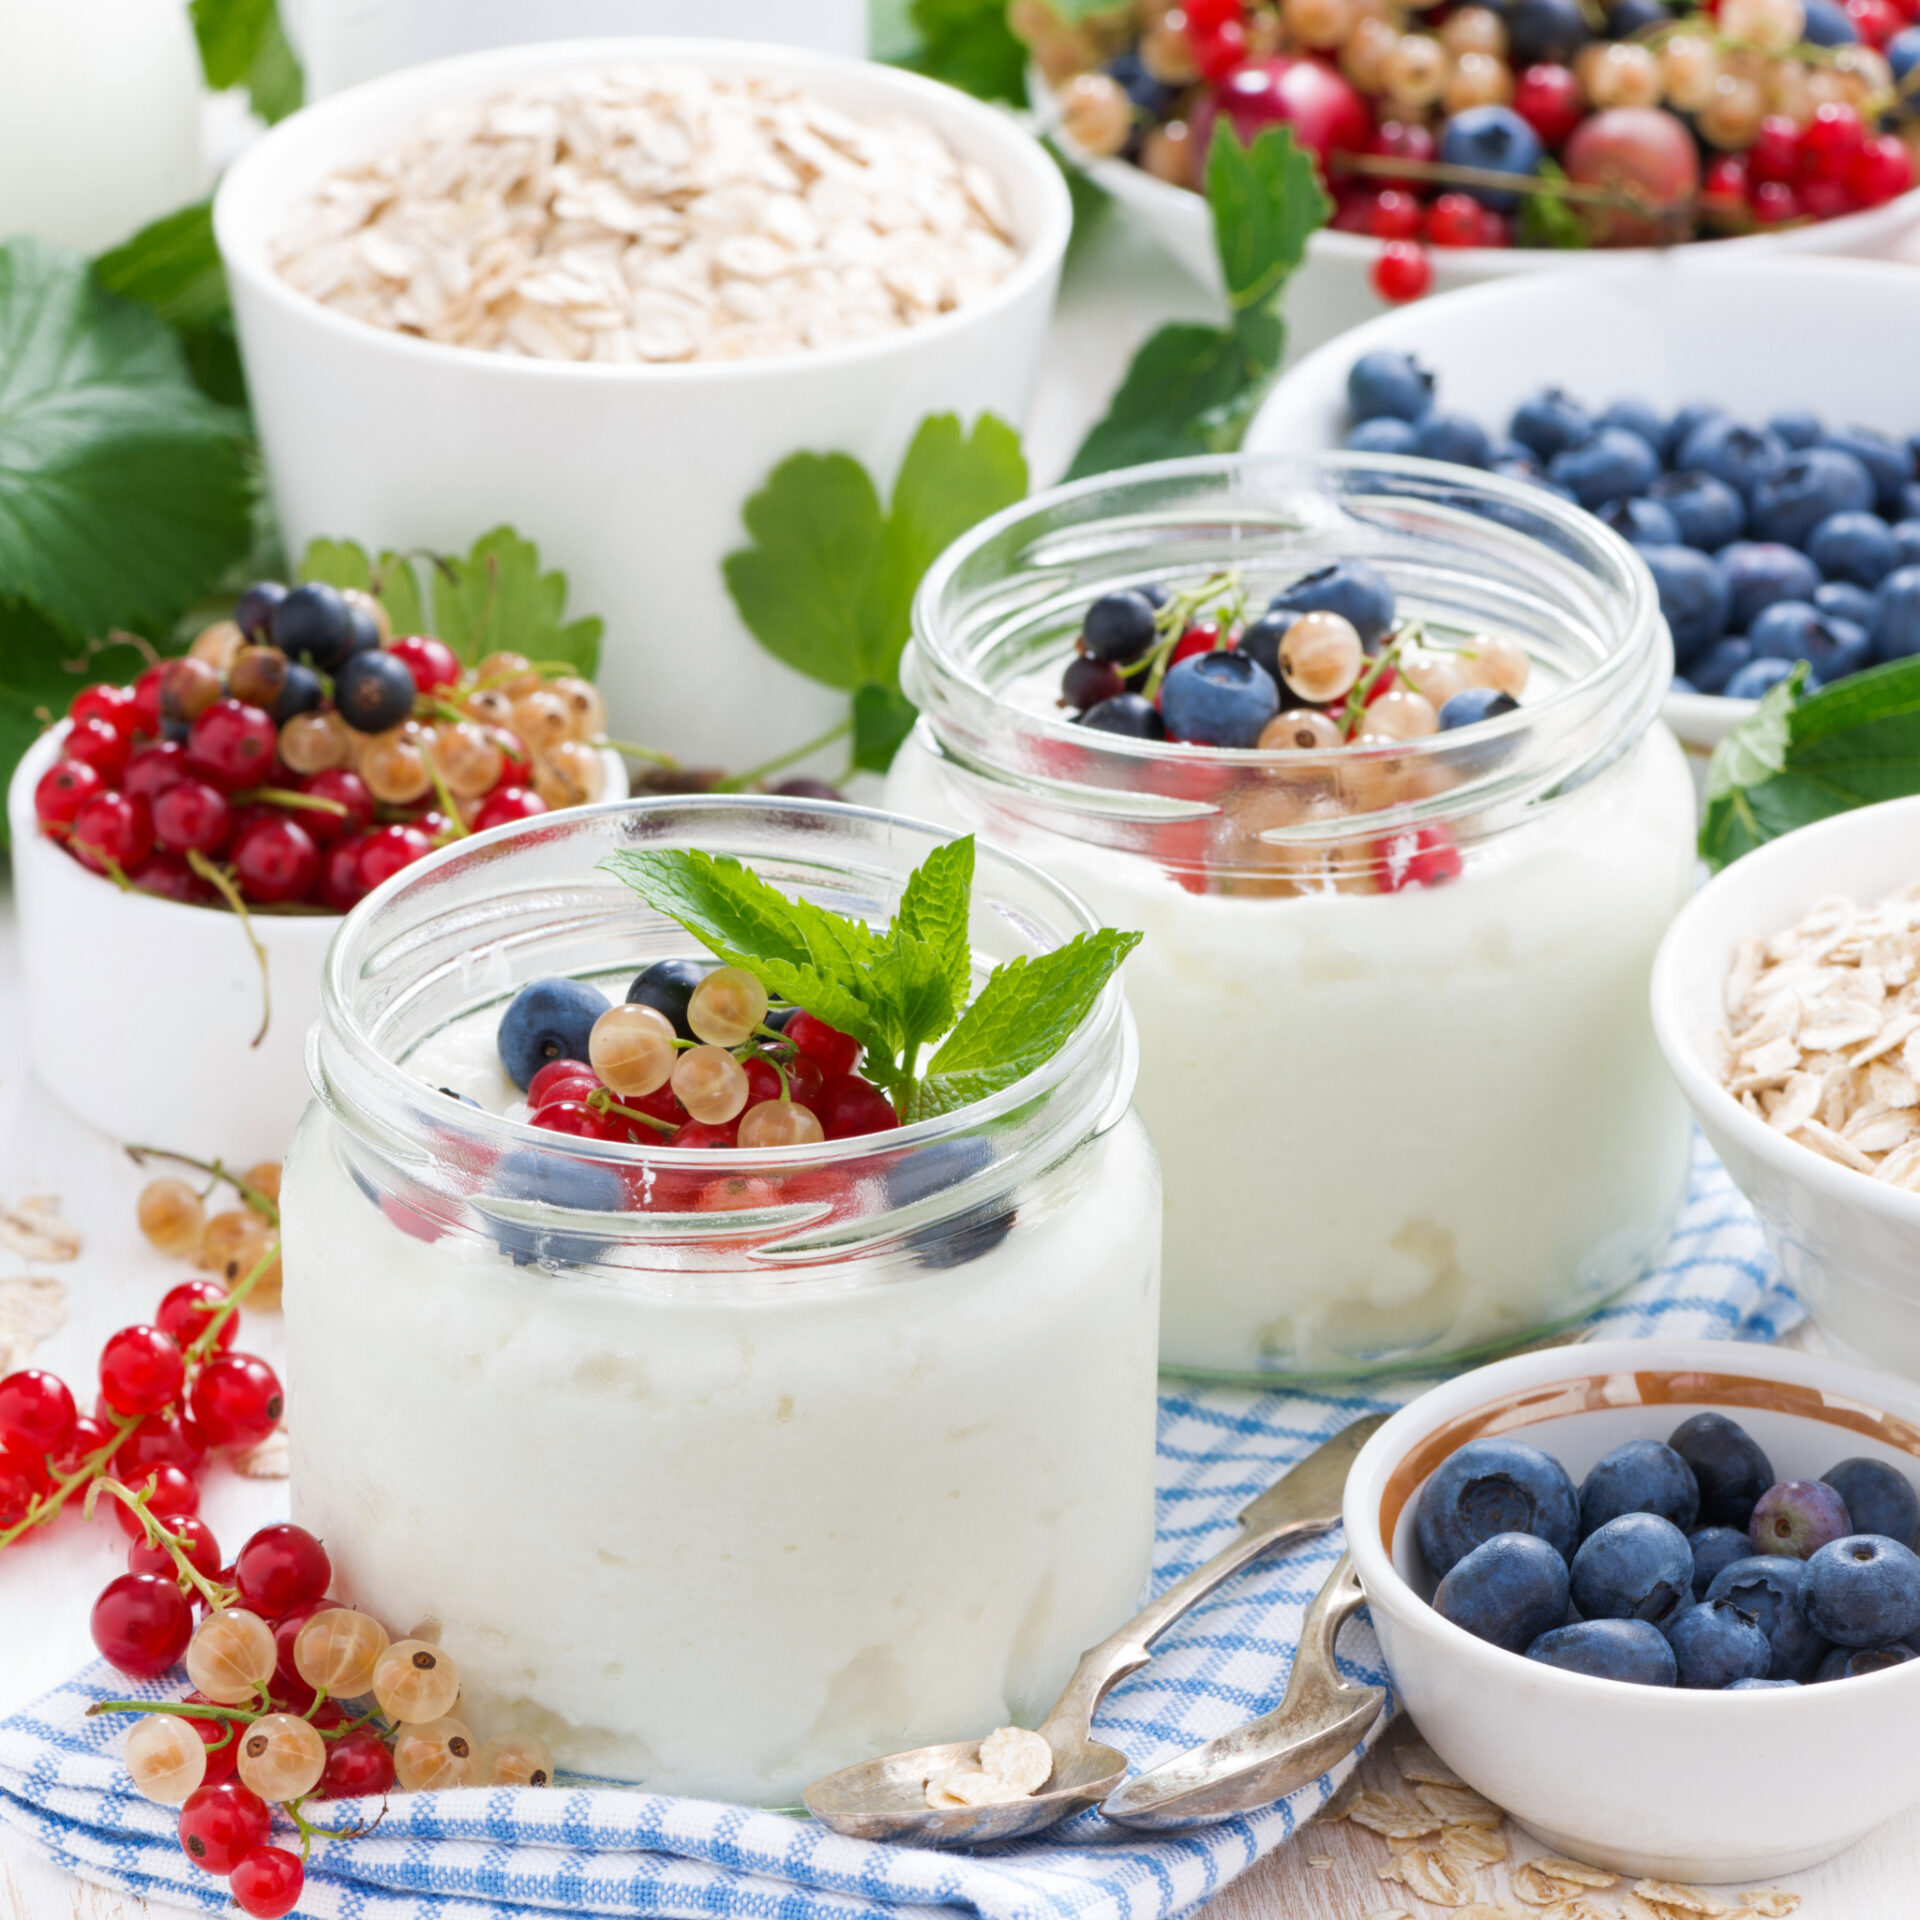 Savory Yogurt Foods Market Key Players, Latest Trends and Growth Forecast till 2032